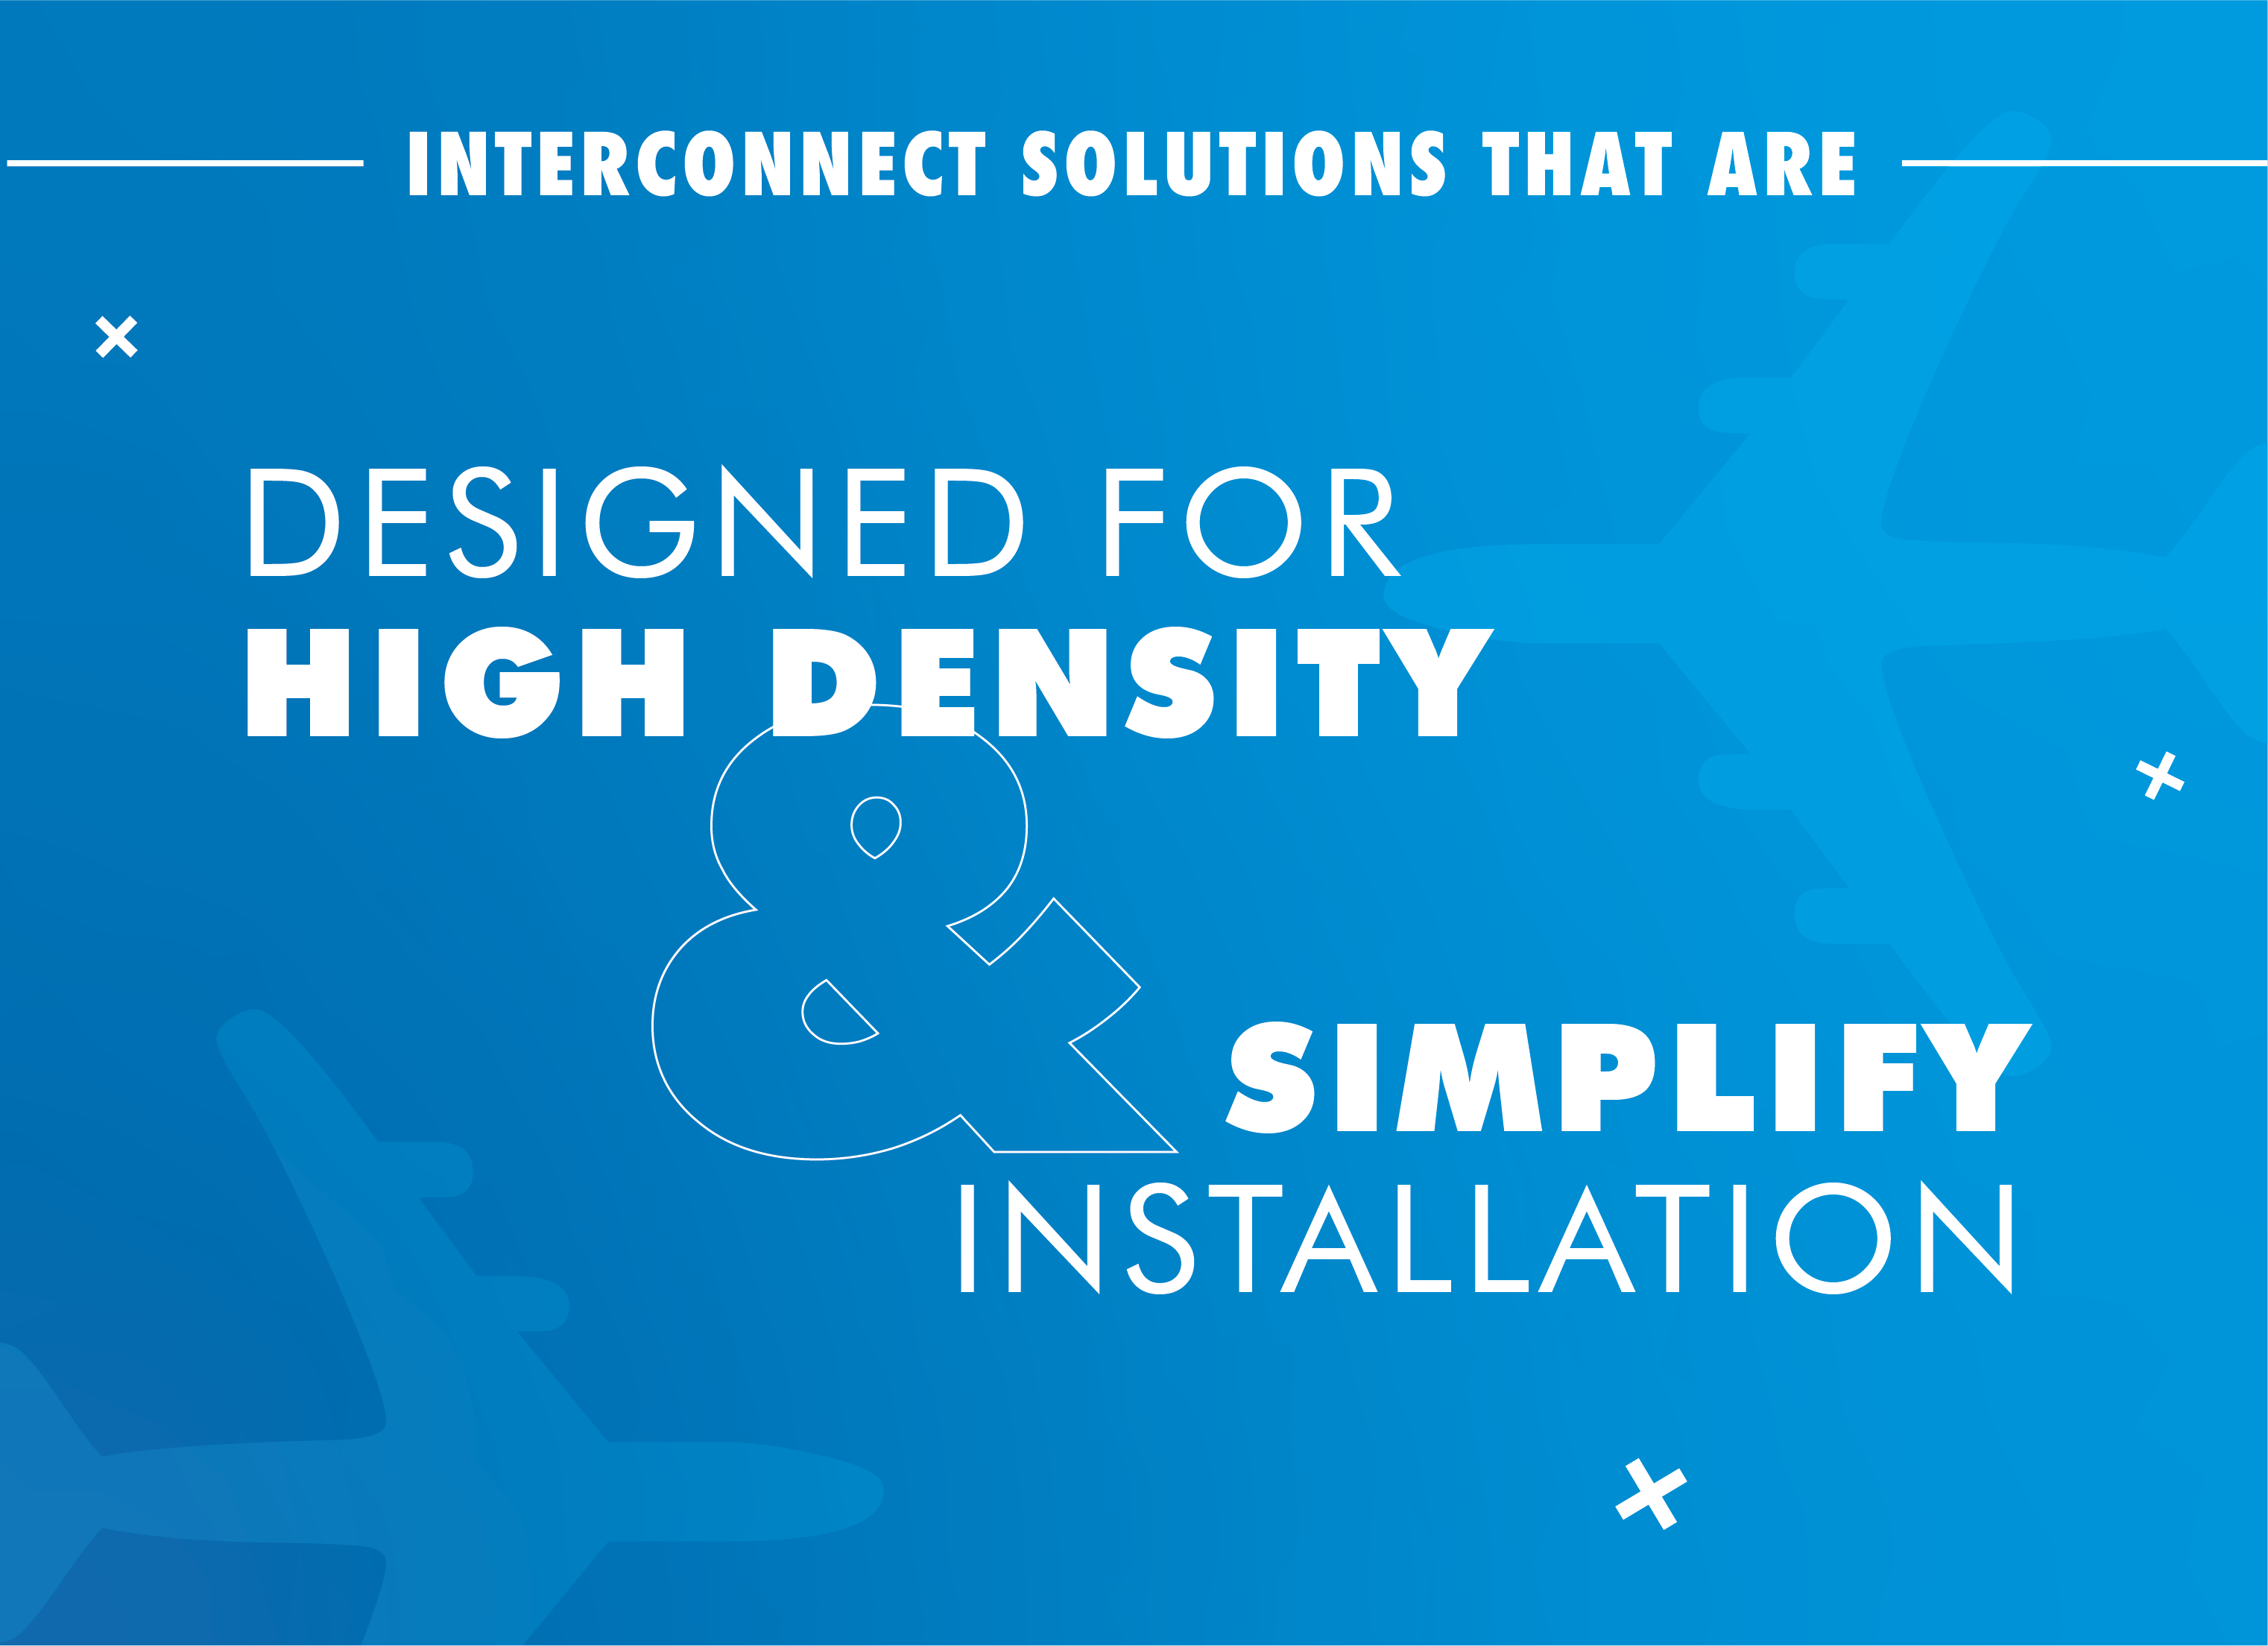 Products for High Density & Simplified Installation